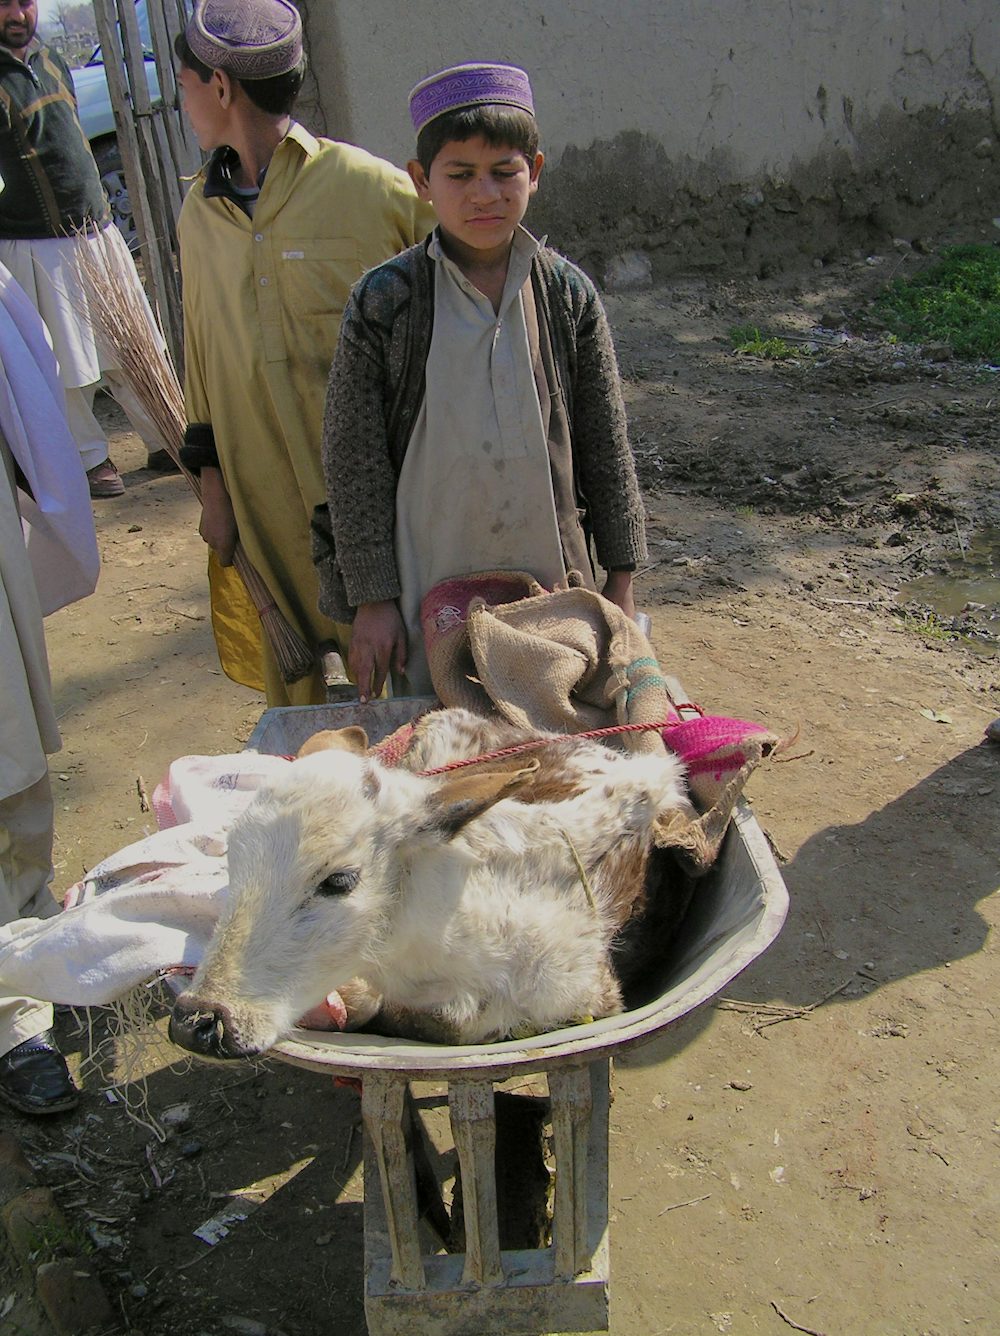 A young boy brings his calf with diarrhea to the veterinary field unit (VFU) in a wheel barrow for treatment. Such a calf represents an extremely valuable asset for a poor farm family in Afghanistan and reliable access to veterinary care at a VFU is greatly appreciated (caption and photo by David Sherman).